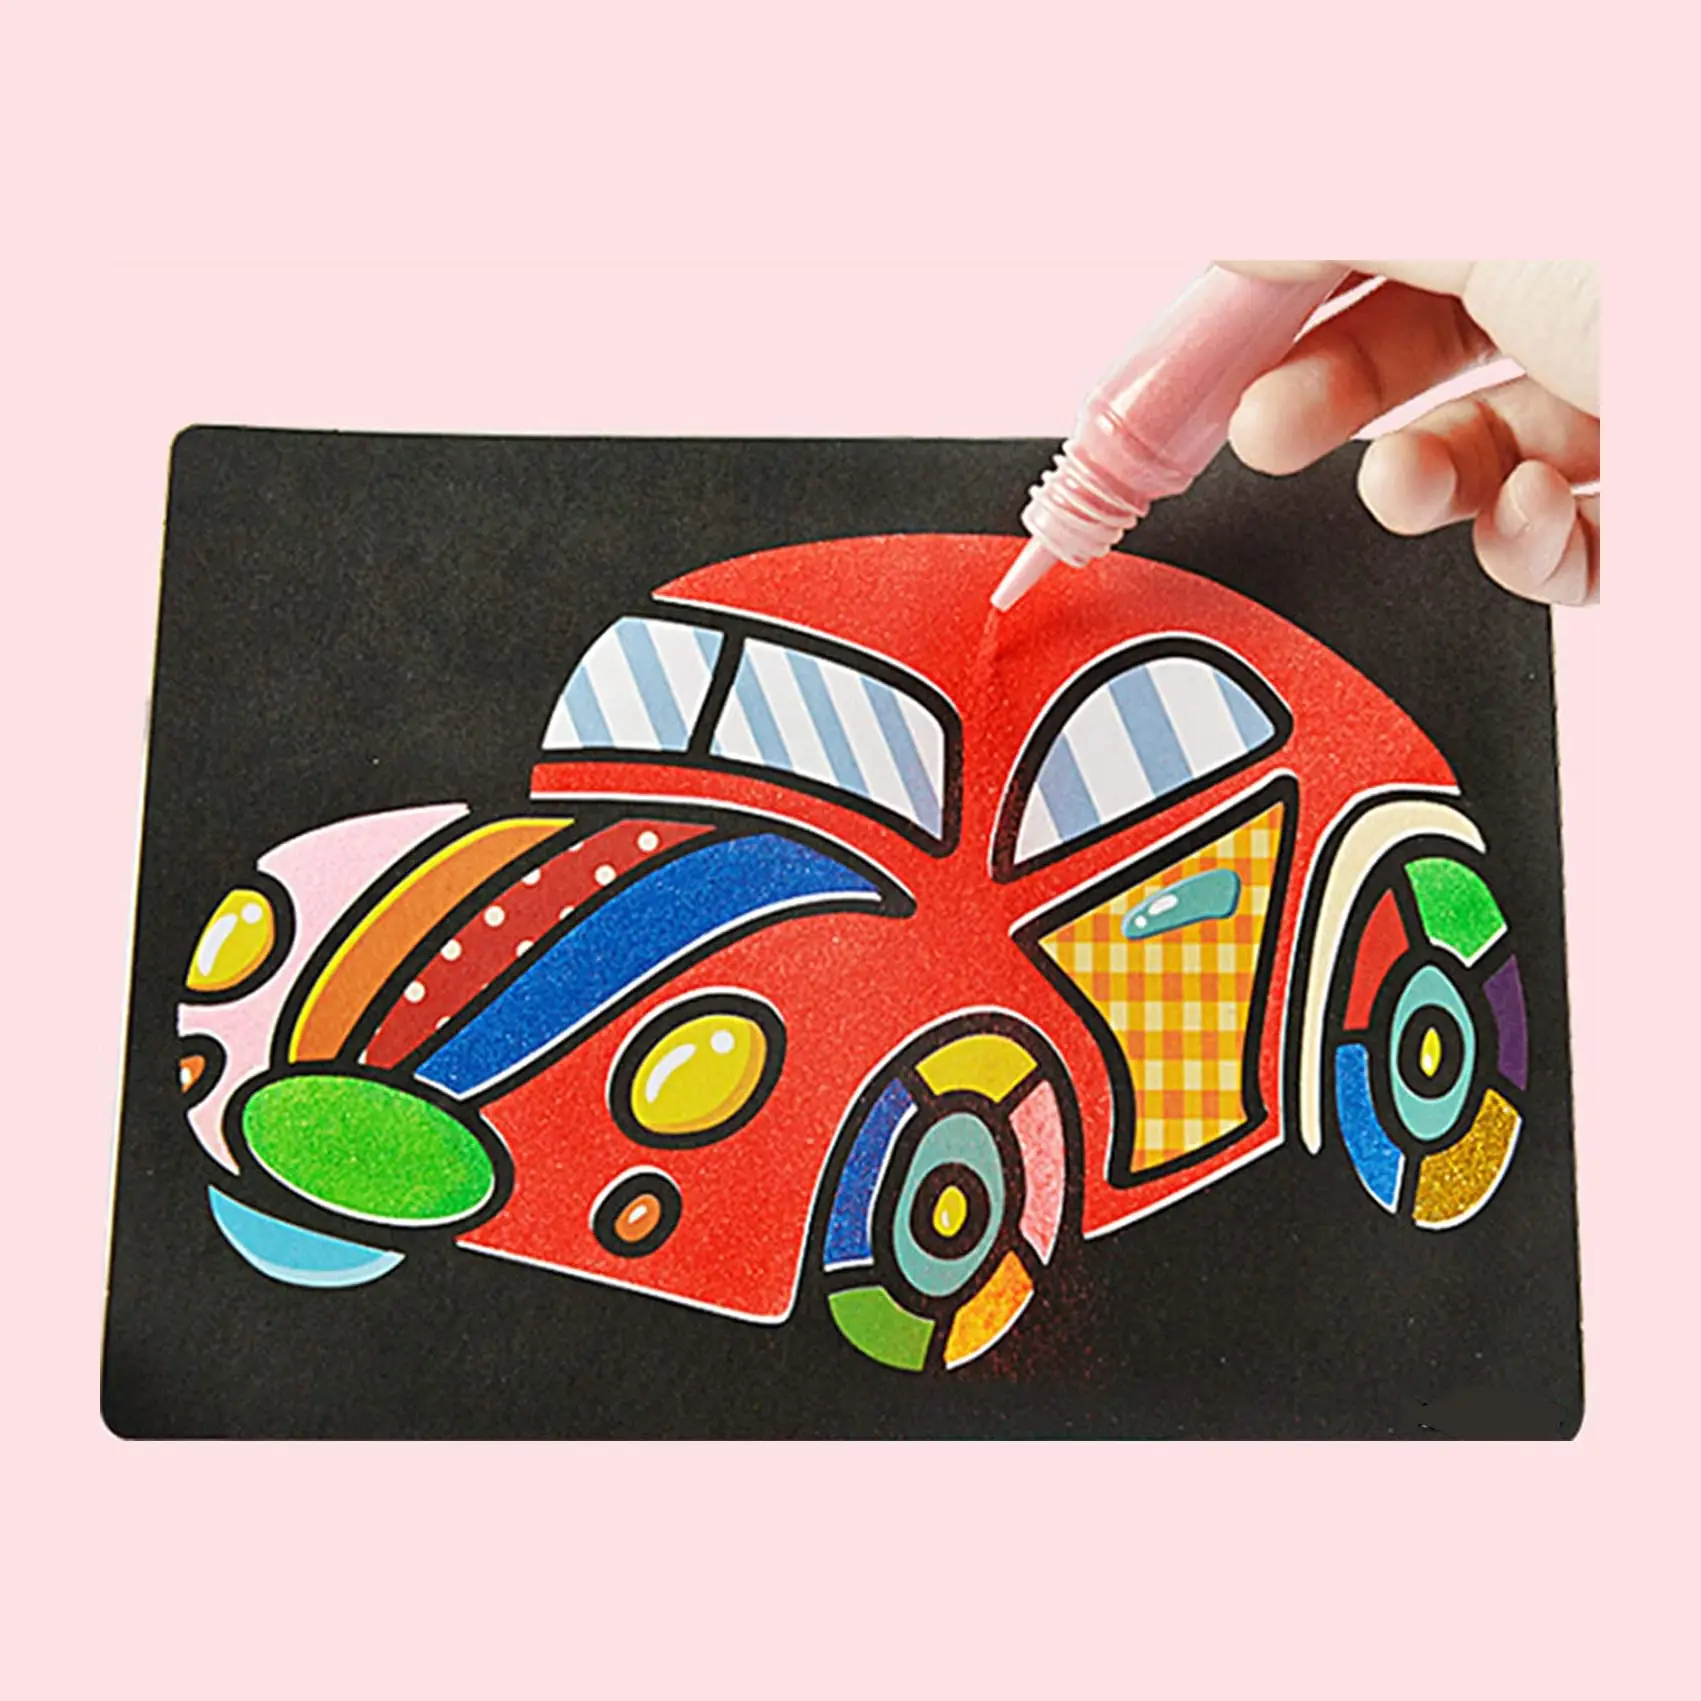 Fun Home Activities Painting Sand Art For Kids, Sand Drawing For Kids Children Art DIY Crafts, Art Sand Card Educational Toy